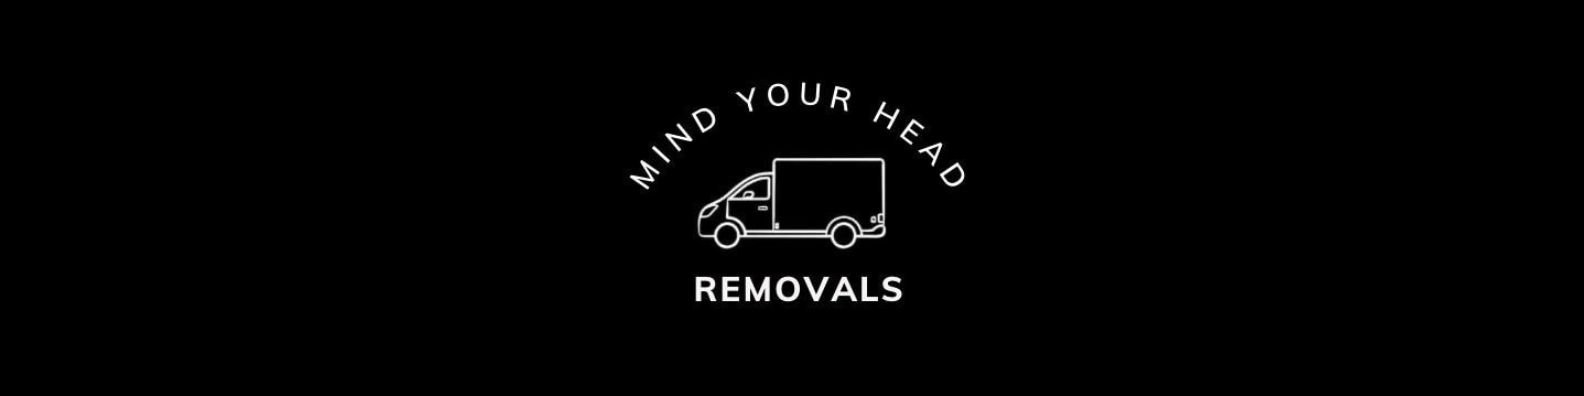 Mind Your Head Removals cover